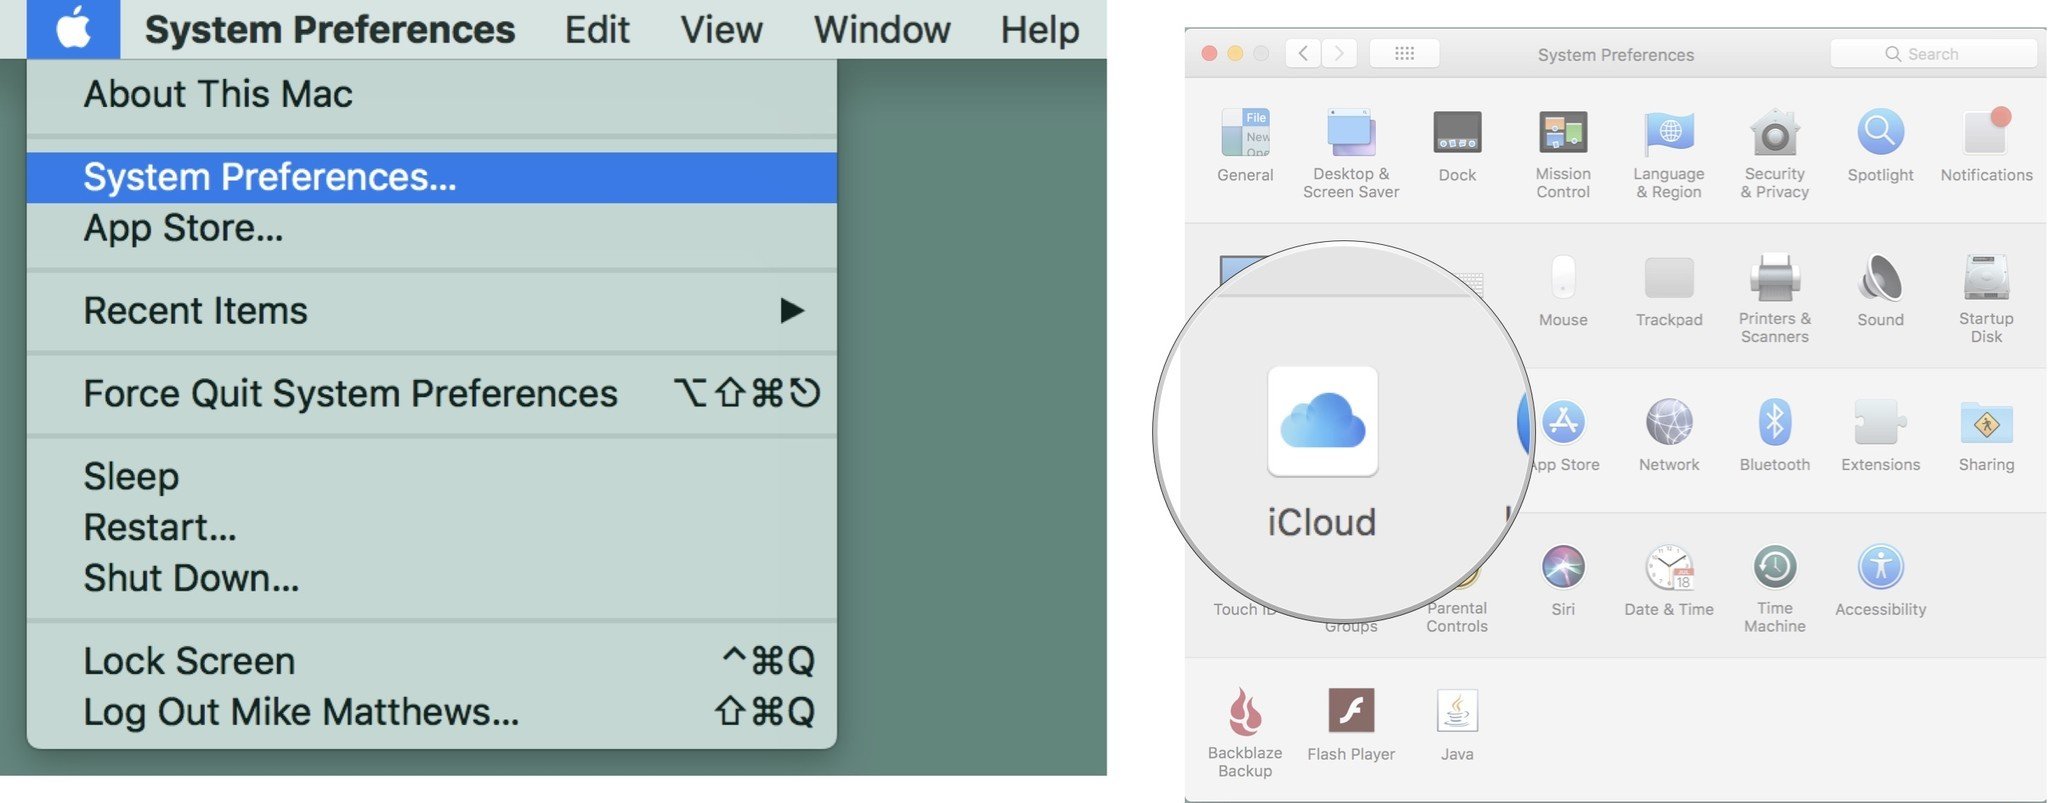 Select System Preferences, then click on iCloud